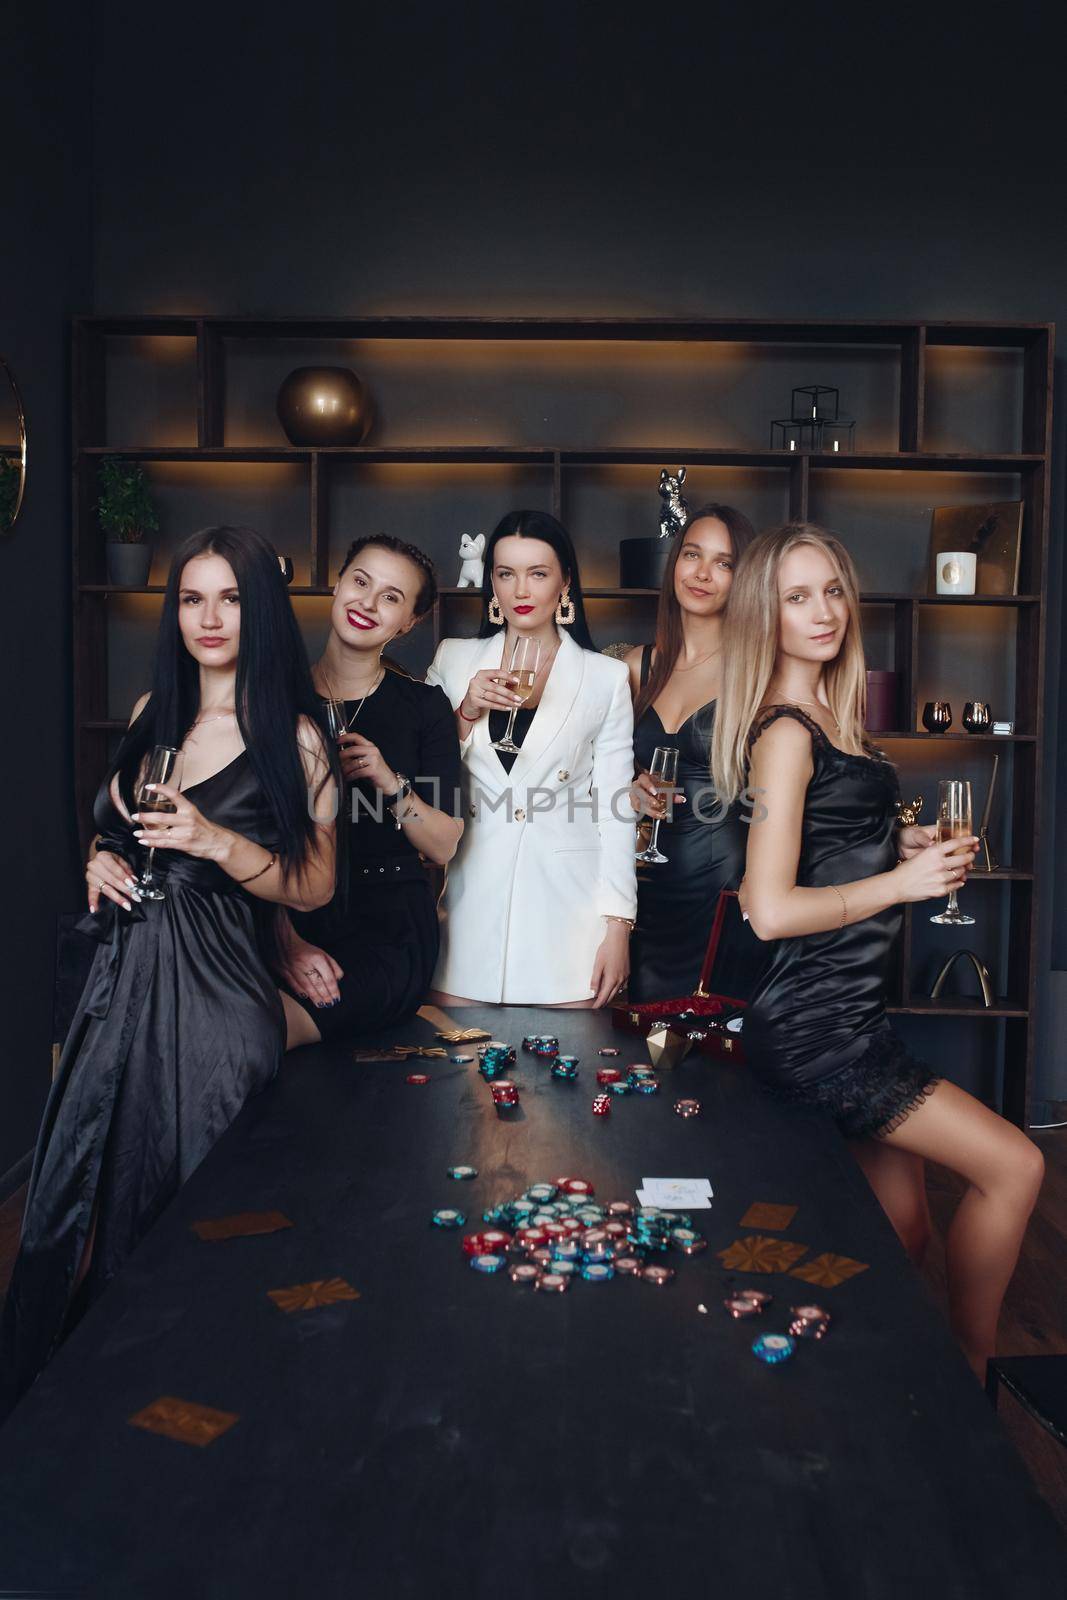 Stock photo portrait of stunning ladies in black holding flutes of champagne. They are posing by the poker table with poker chips and cards over it. One woman in white in the middle of a group.